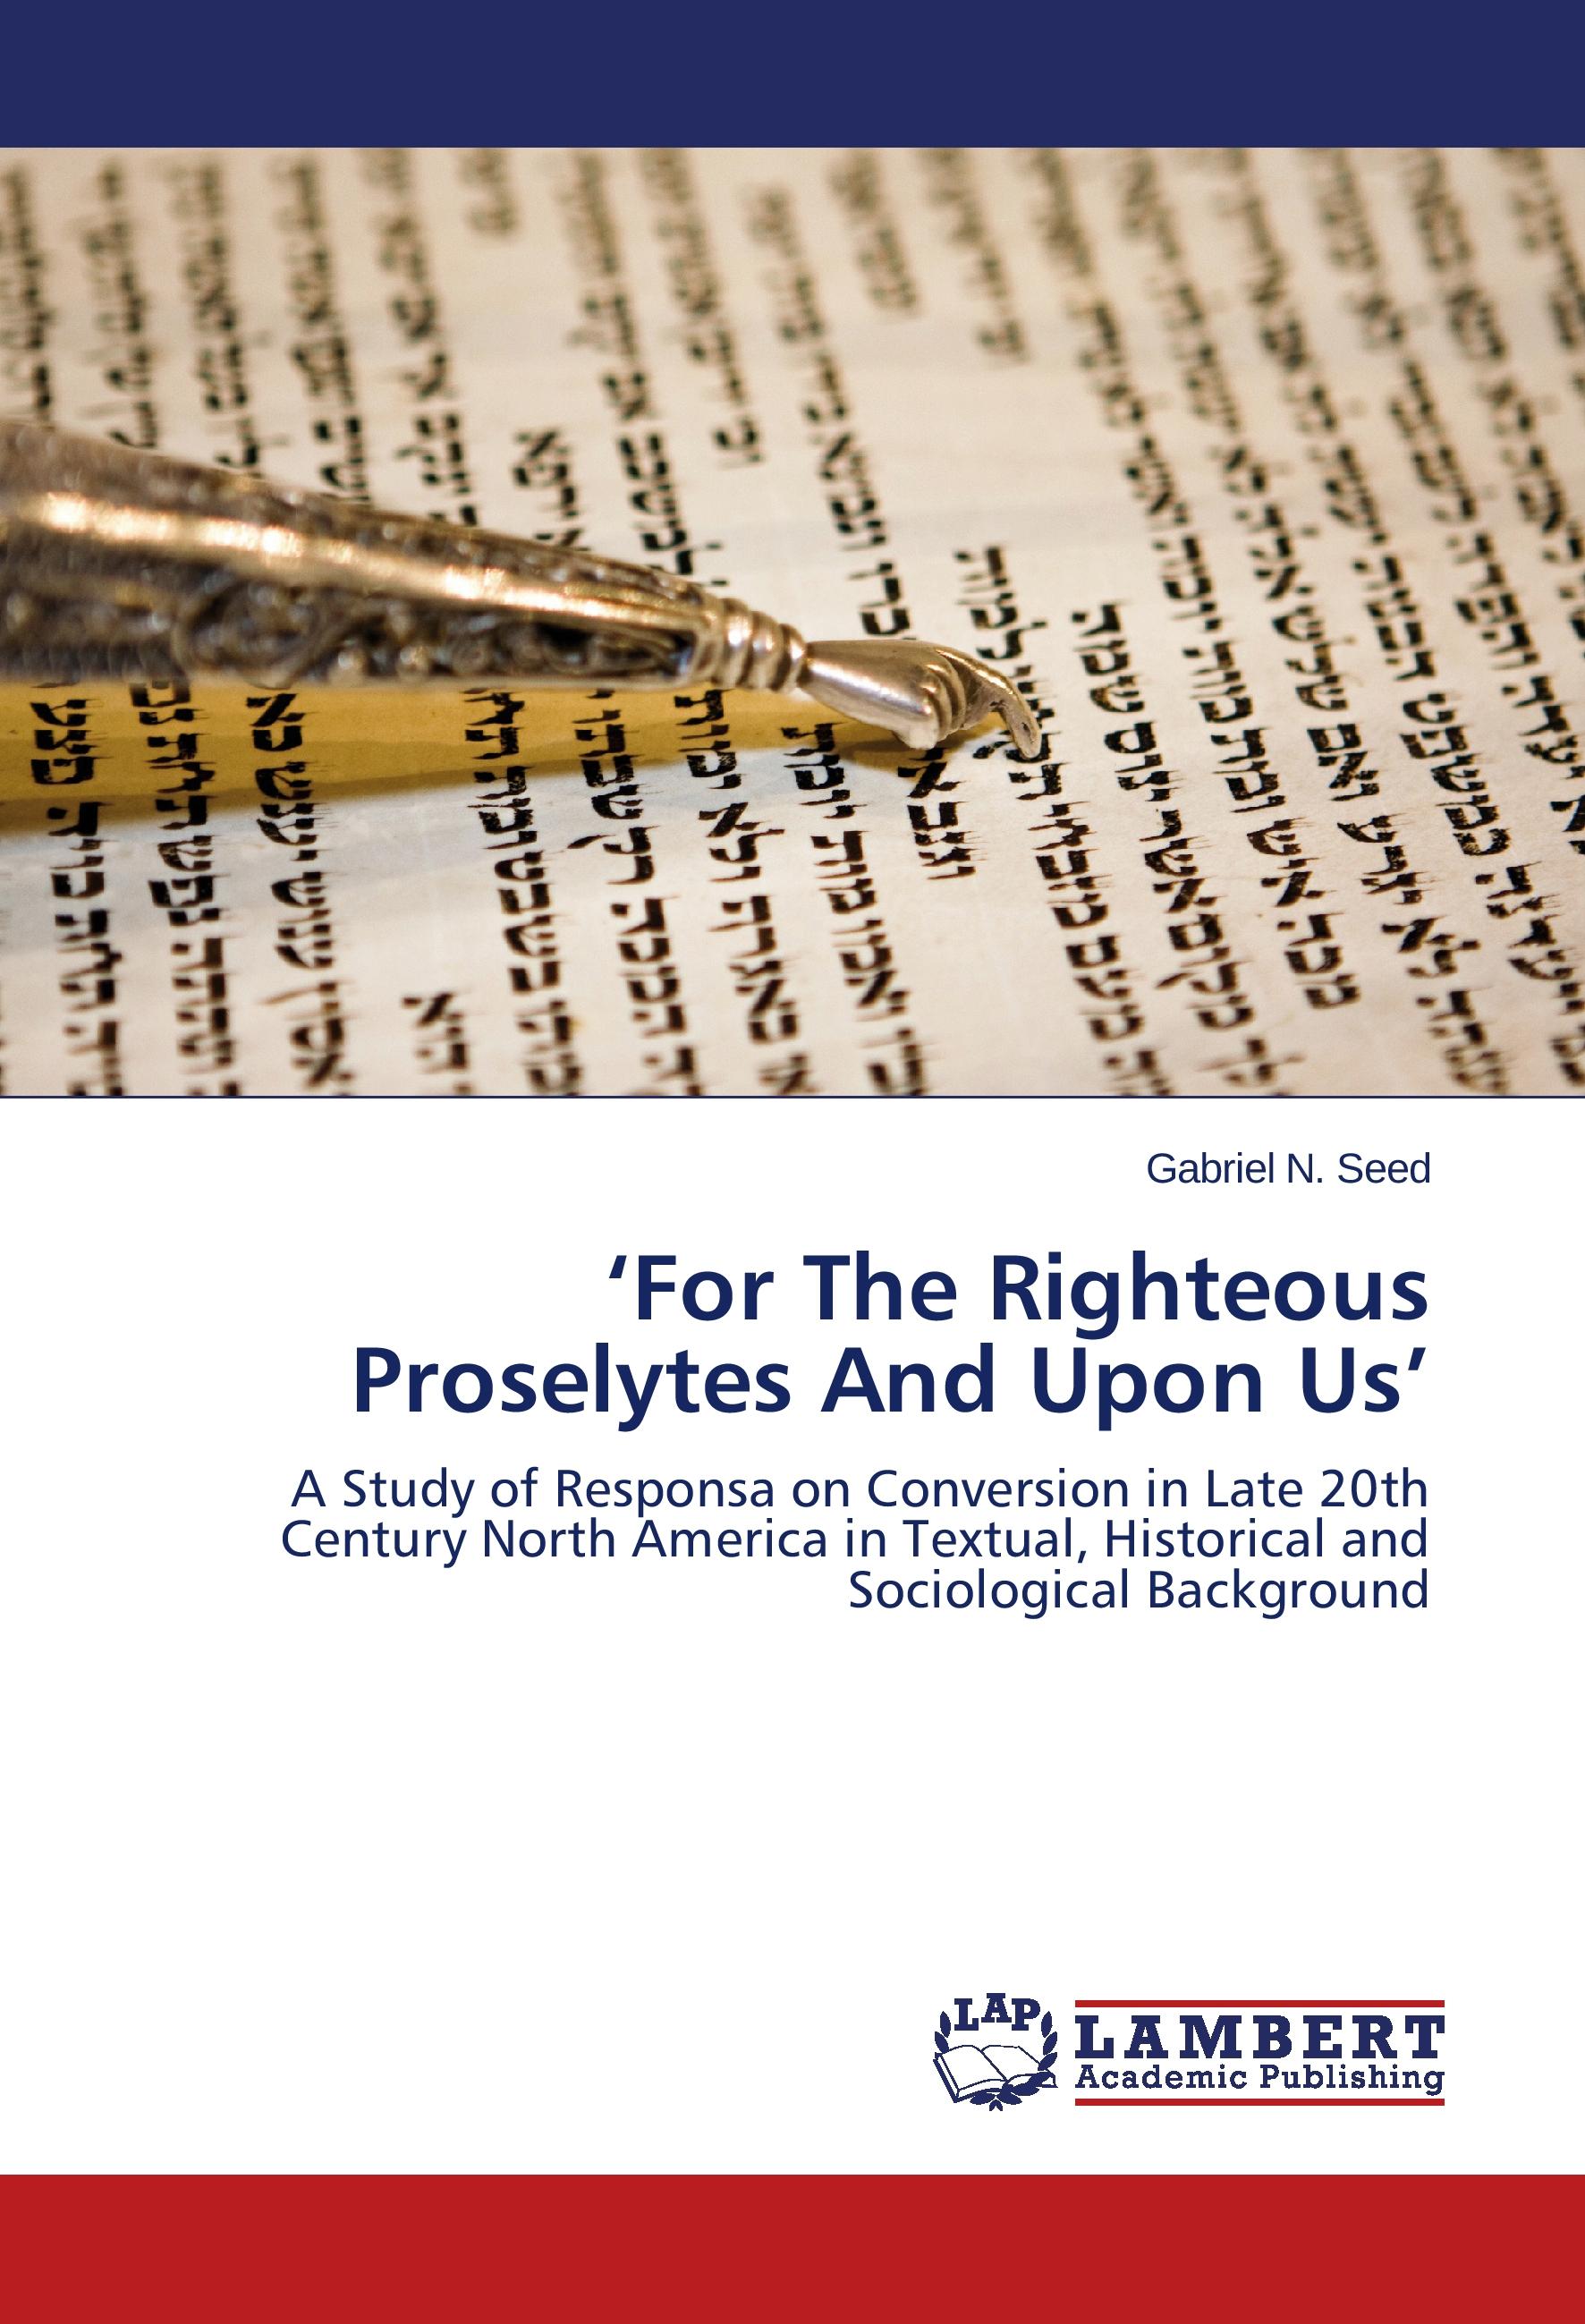 For The Righteous Proselytes And Upon Us - Gabriel N. Seed